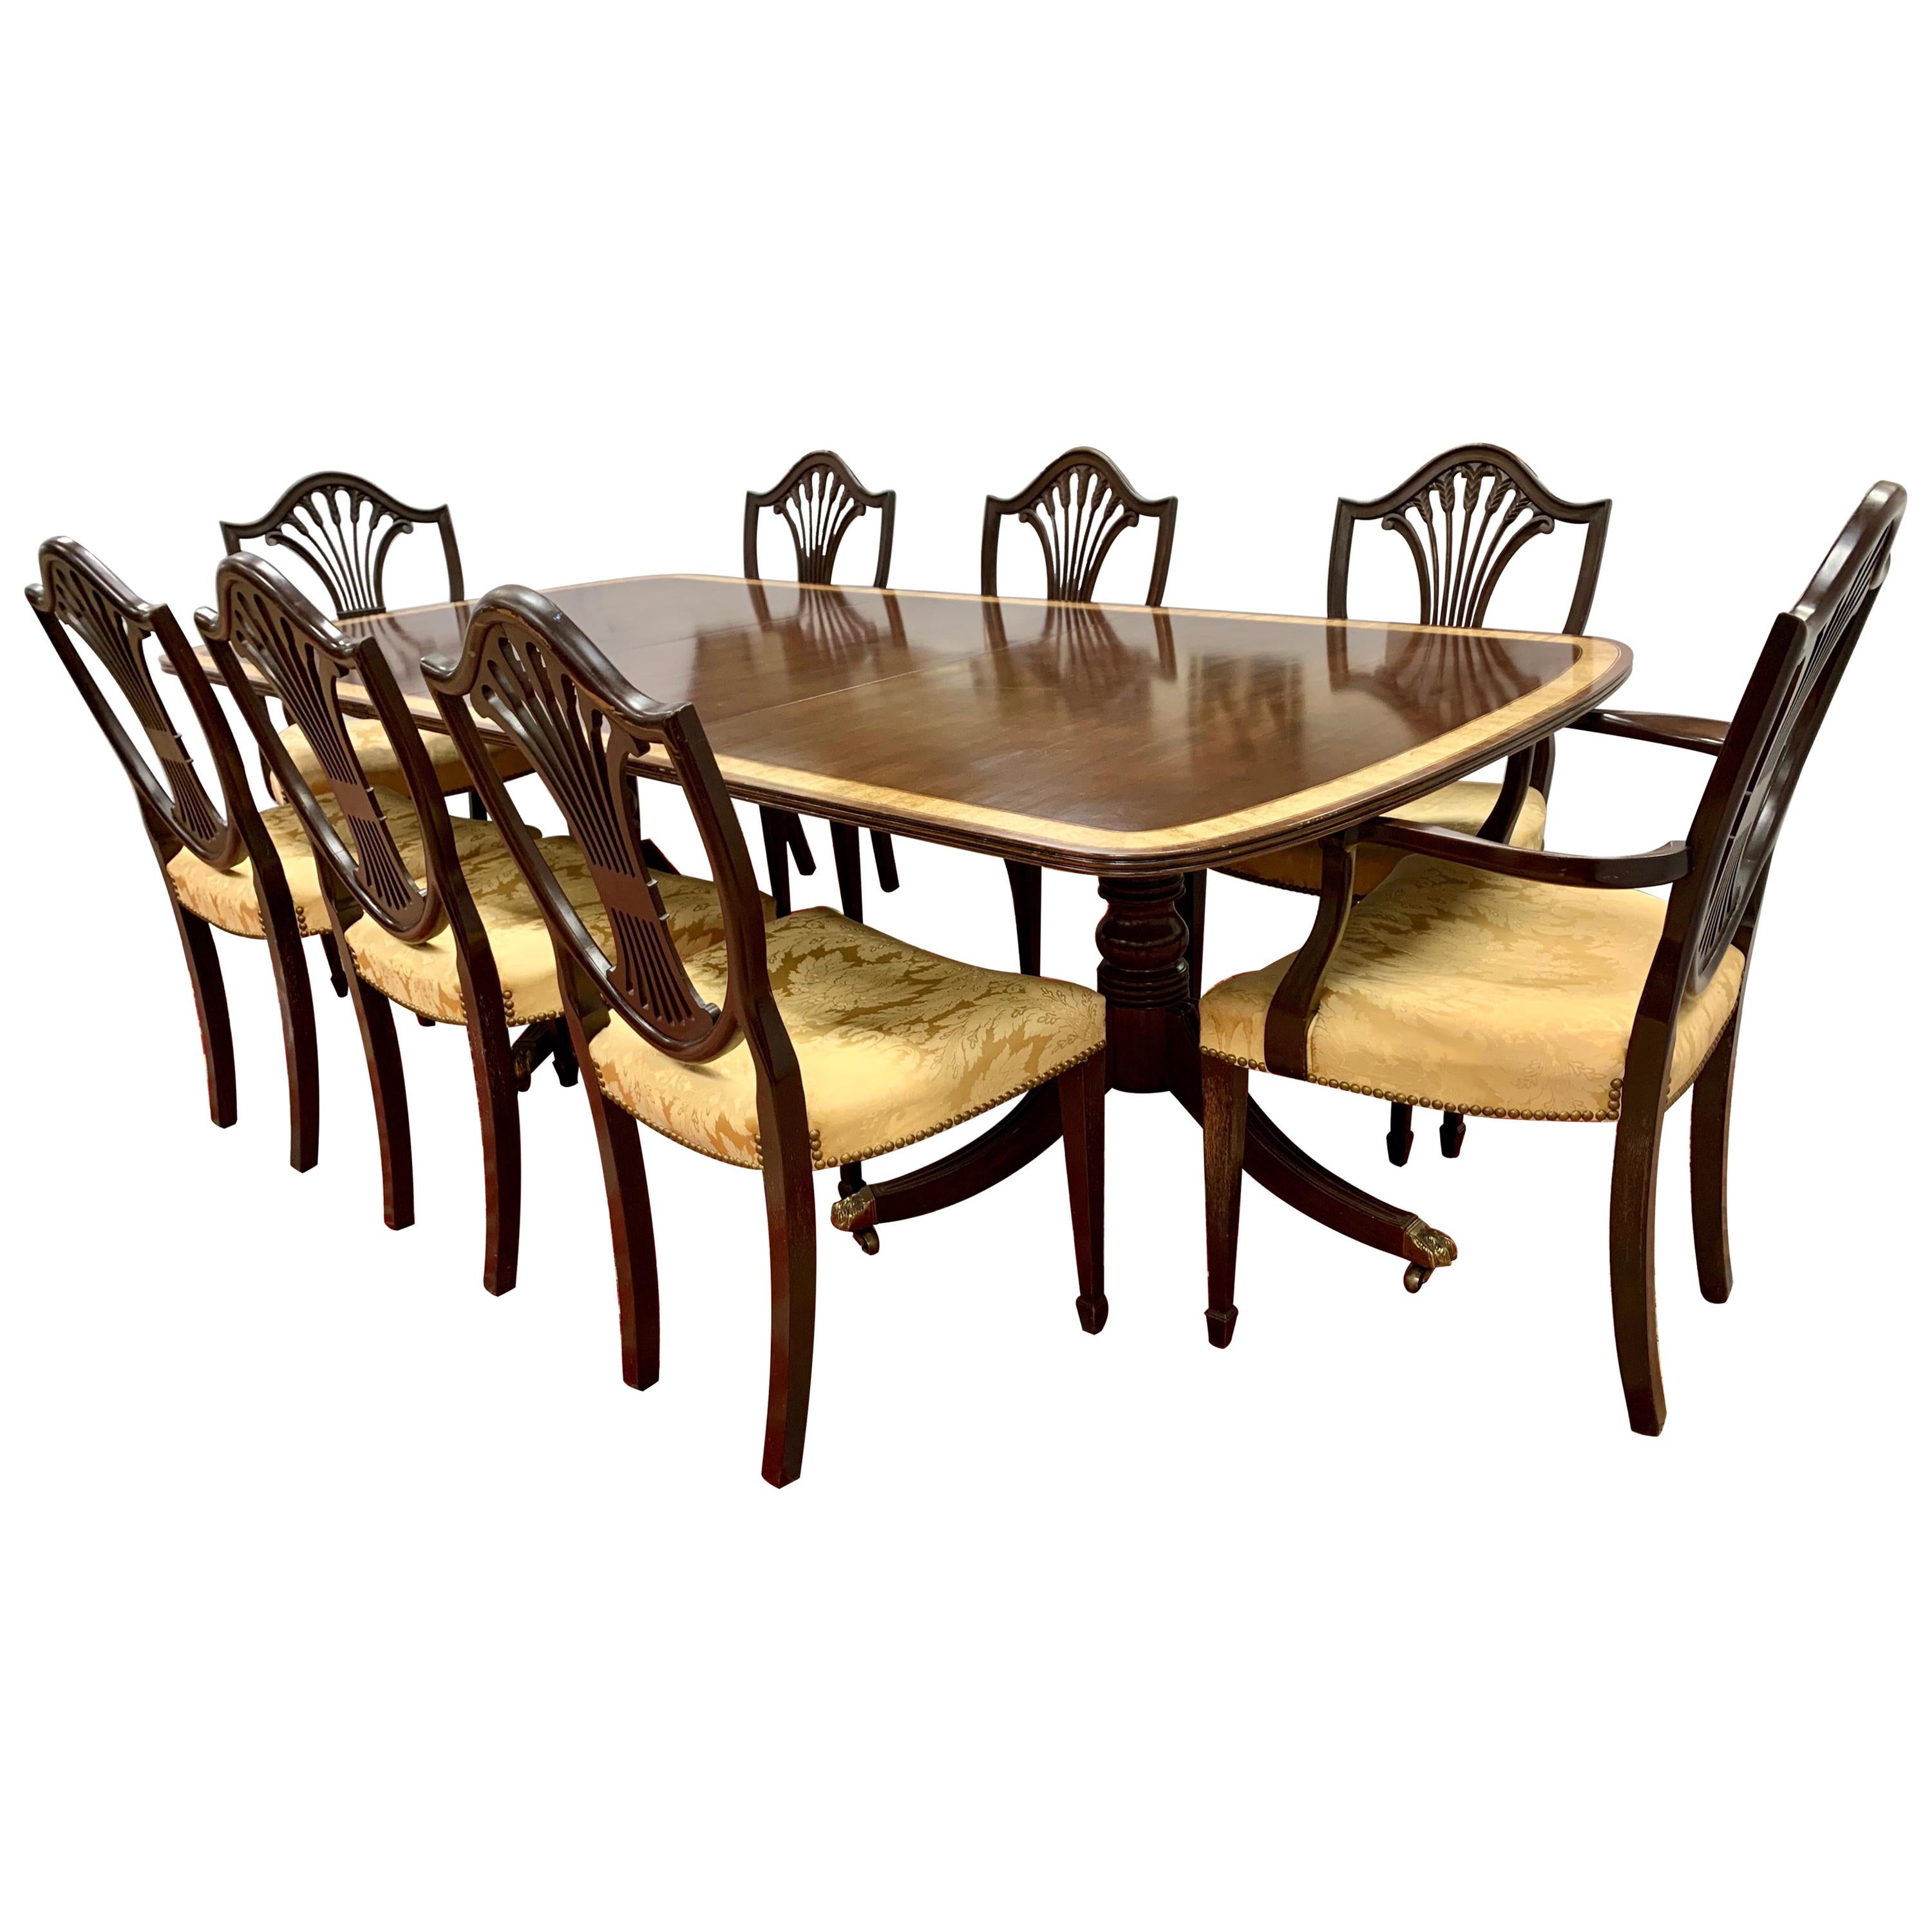 Georgian Mahogany Pedestal Table and 8 Carved Wheat Sheaf Chairs, Dining Set